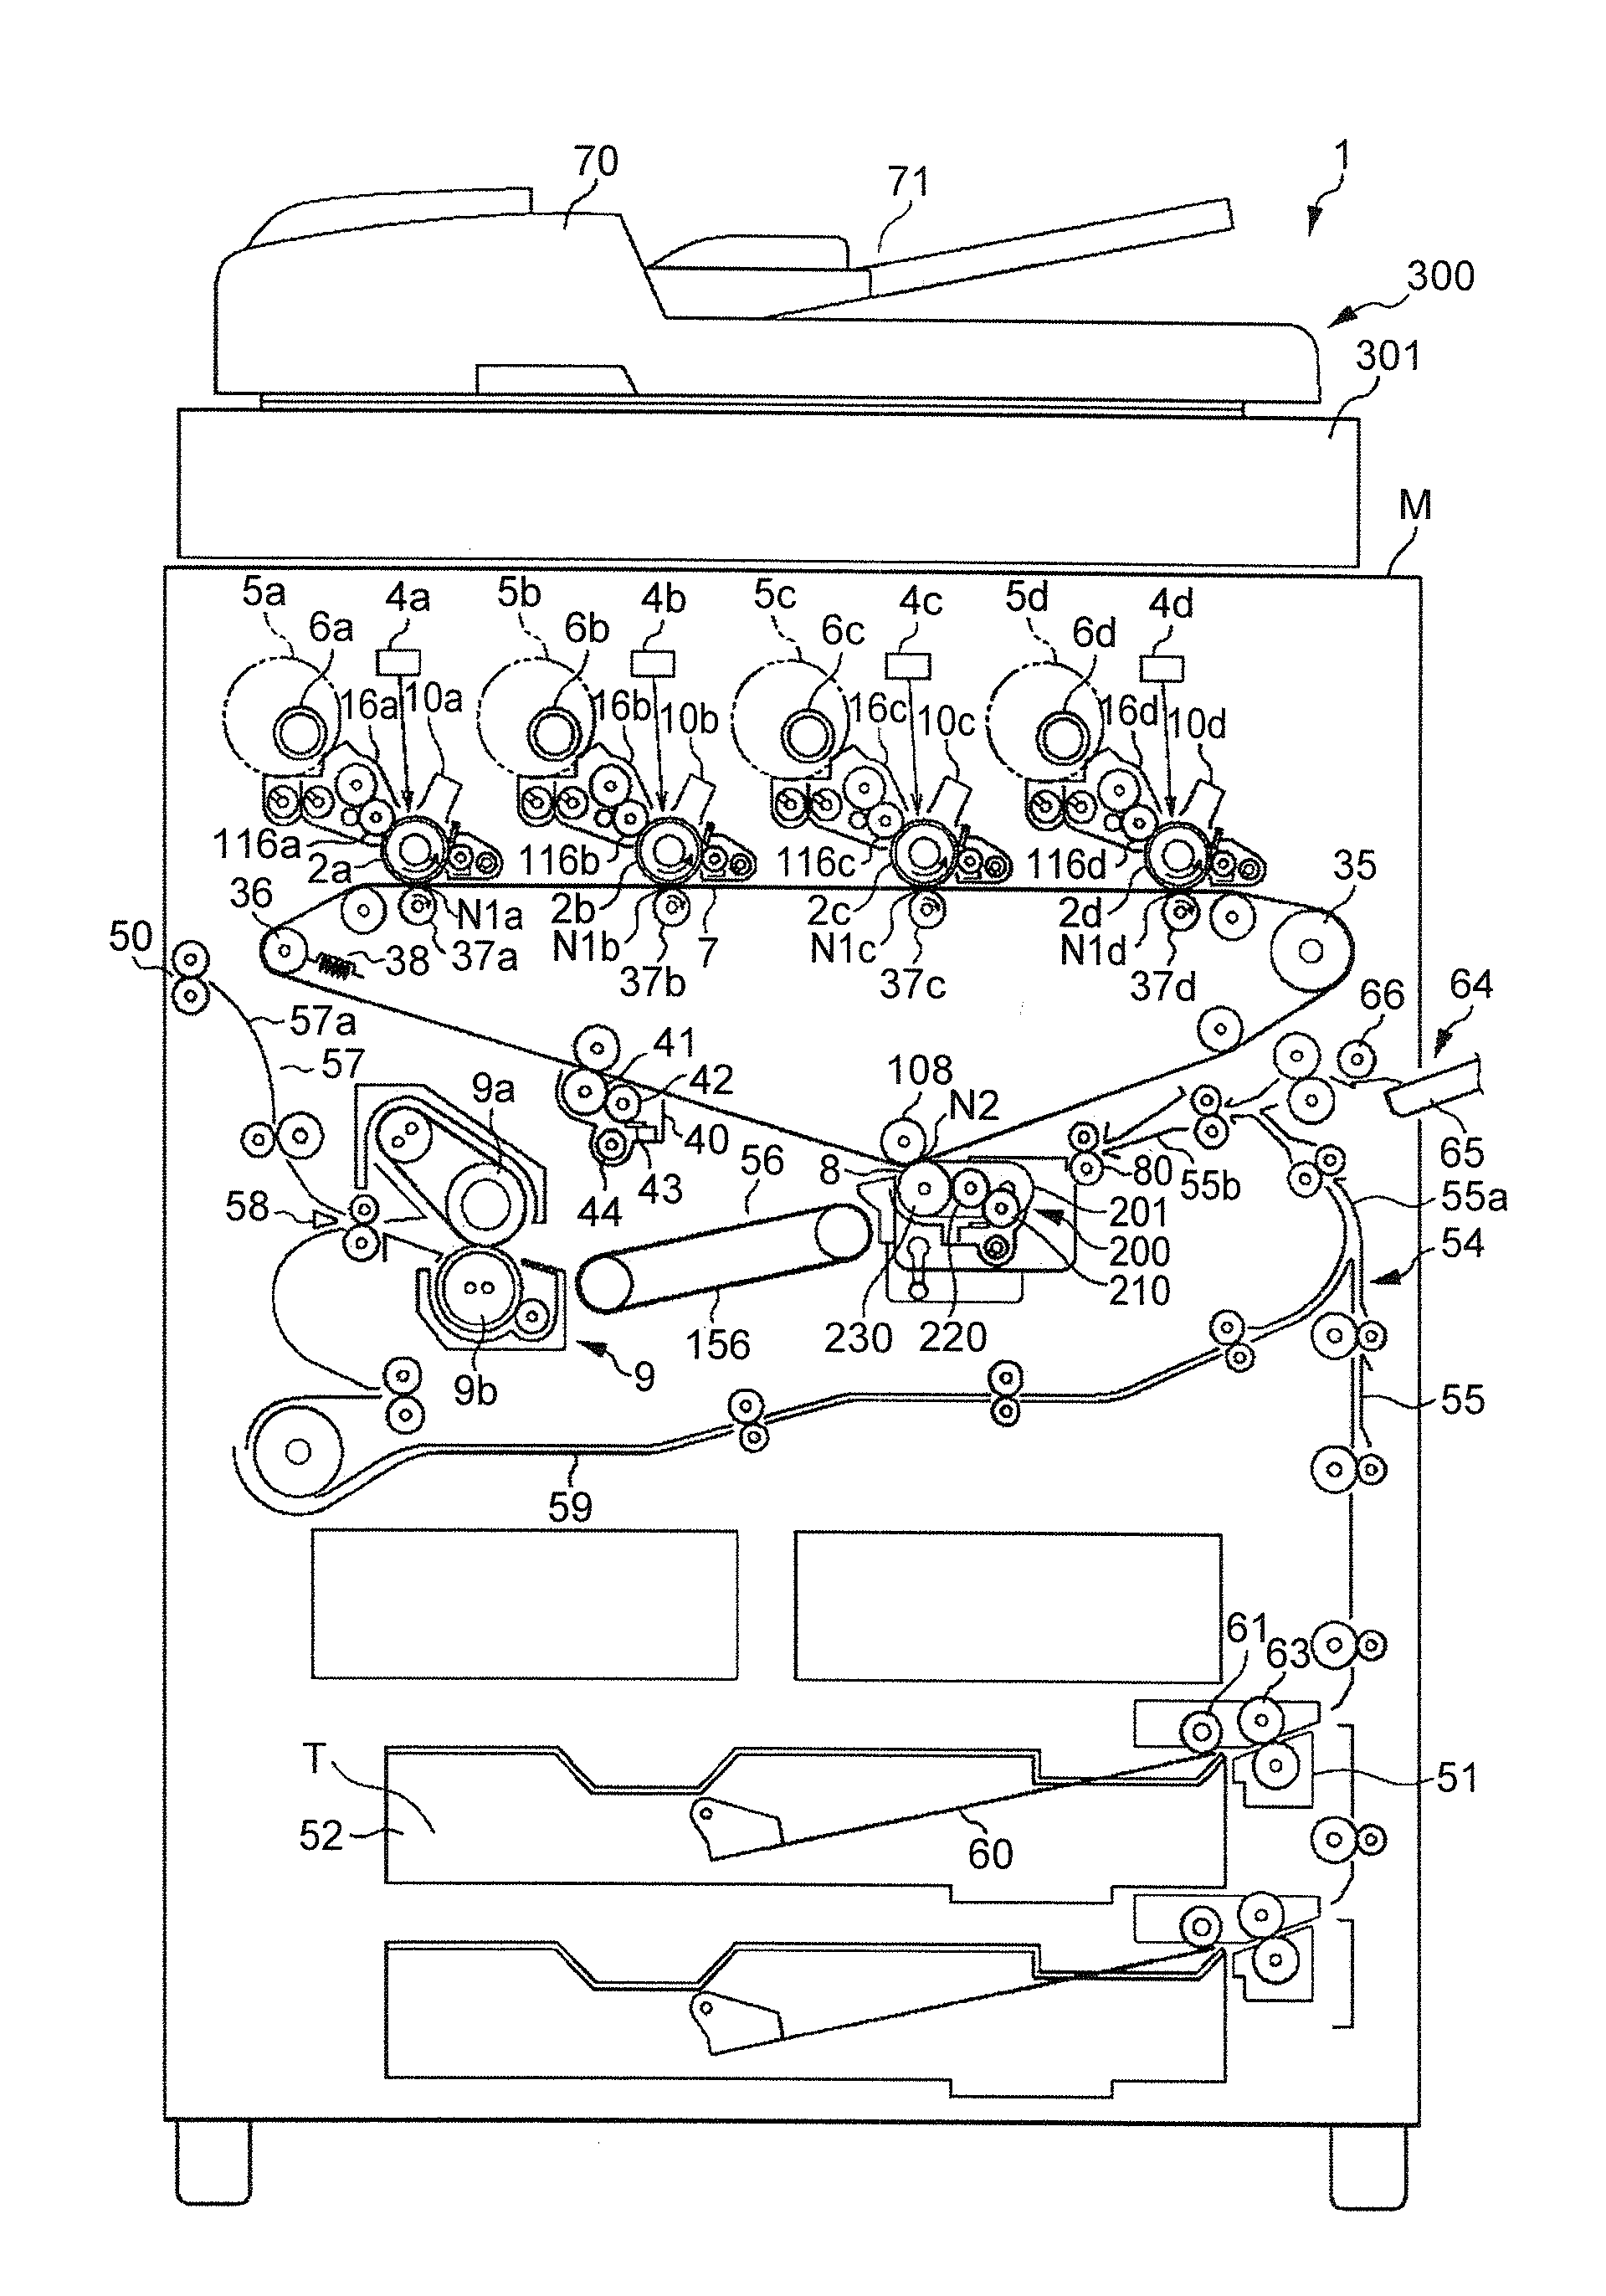 Image reading apparatus and image forming apparatus